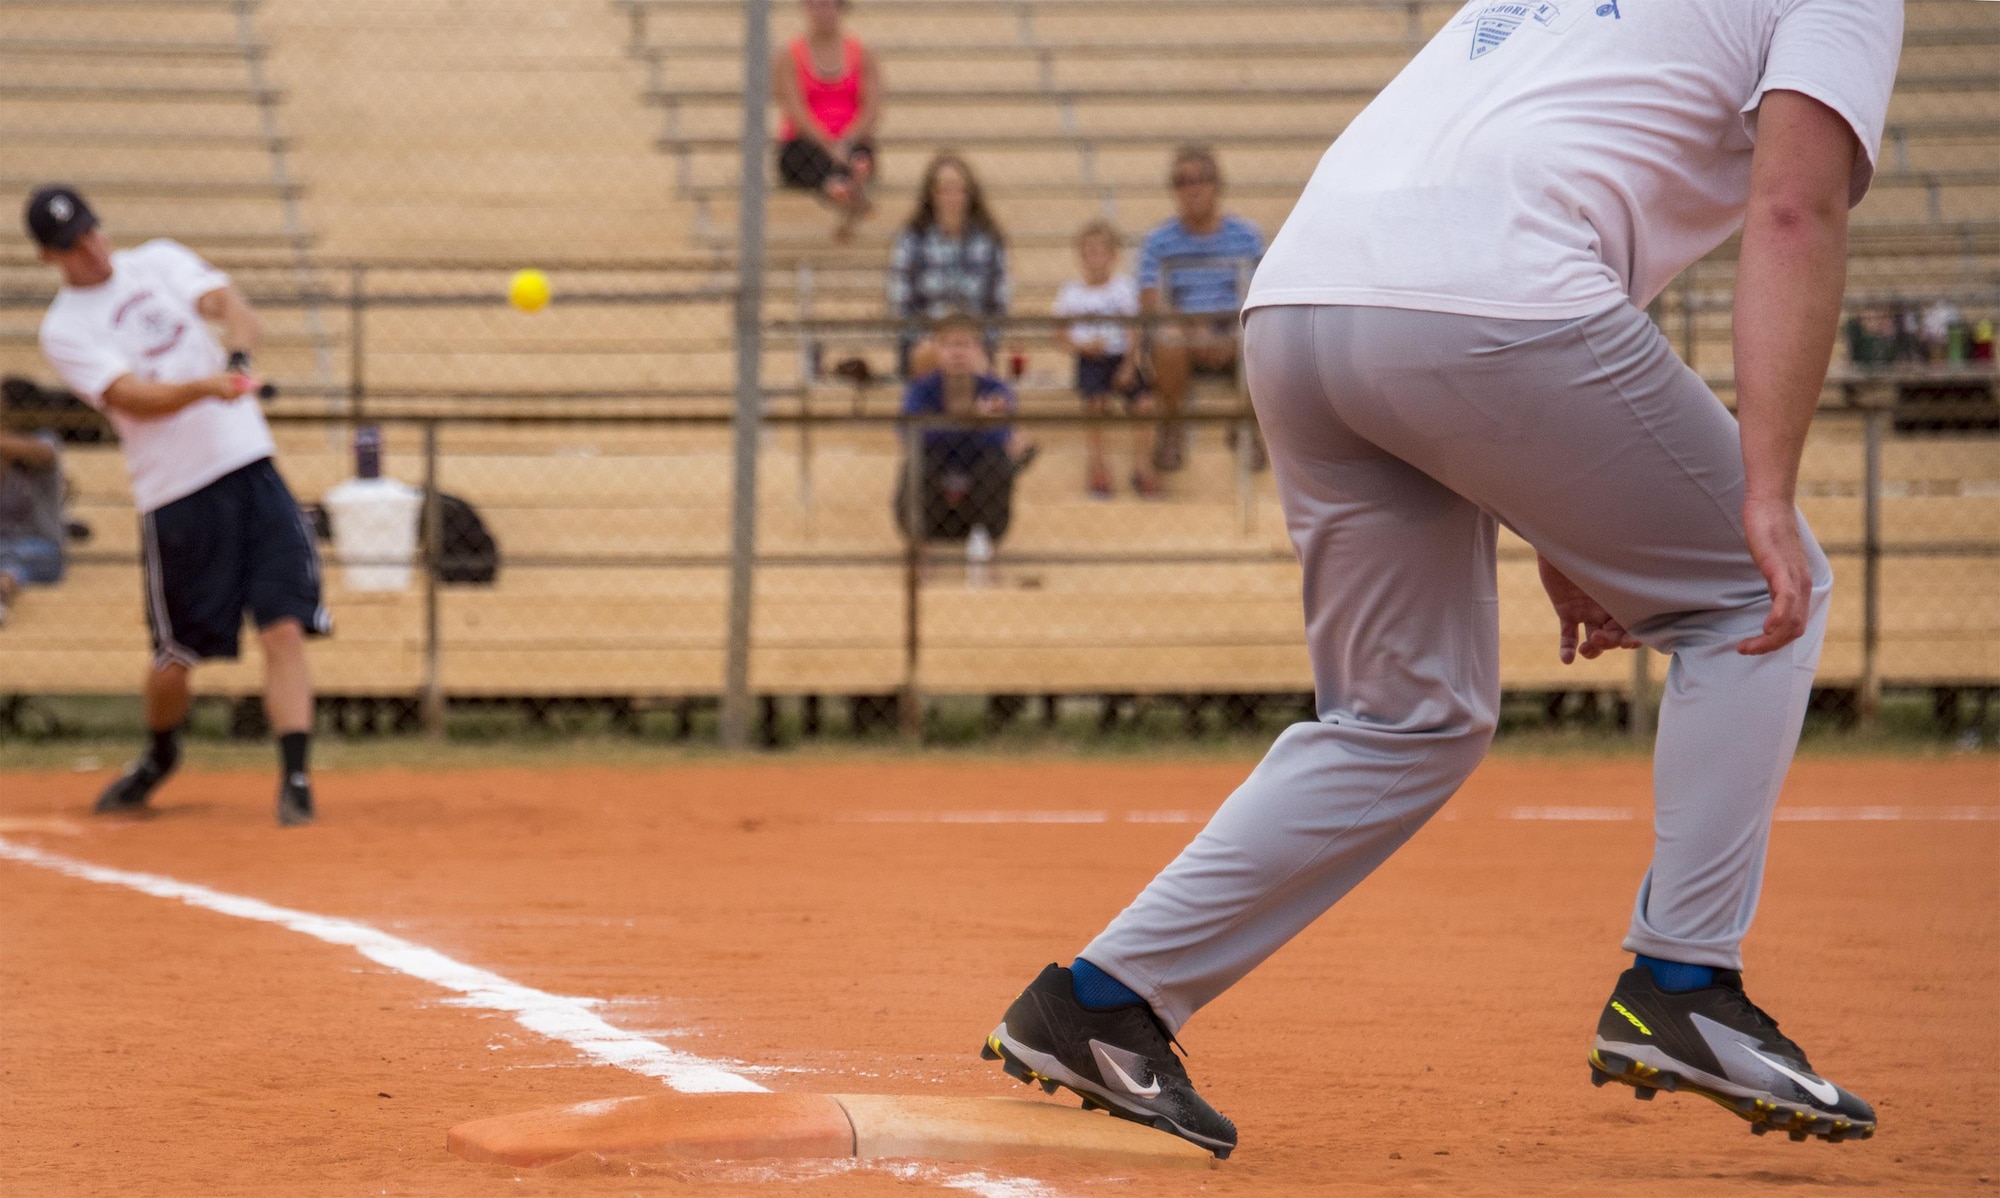 A 33rd Maintenance Group team member hits a line drive as the runner takes off from first base during their team’s intramural softball game against the 96th Communications Squadron team at Eglin Air Force Base, Fla., May 11.  The CS team won easily over the MXG team during the opening week of the intramural softball season.  (U.S. Air Force photo/Samuel King Jr.)